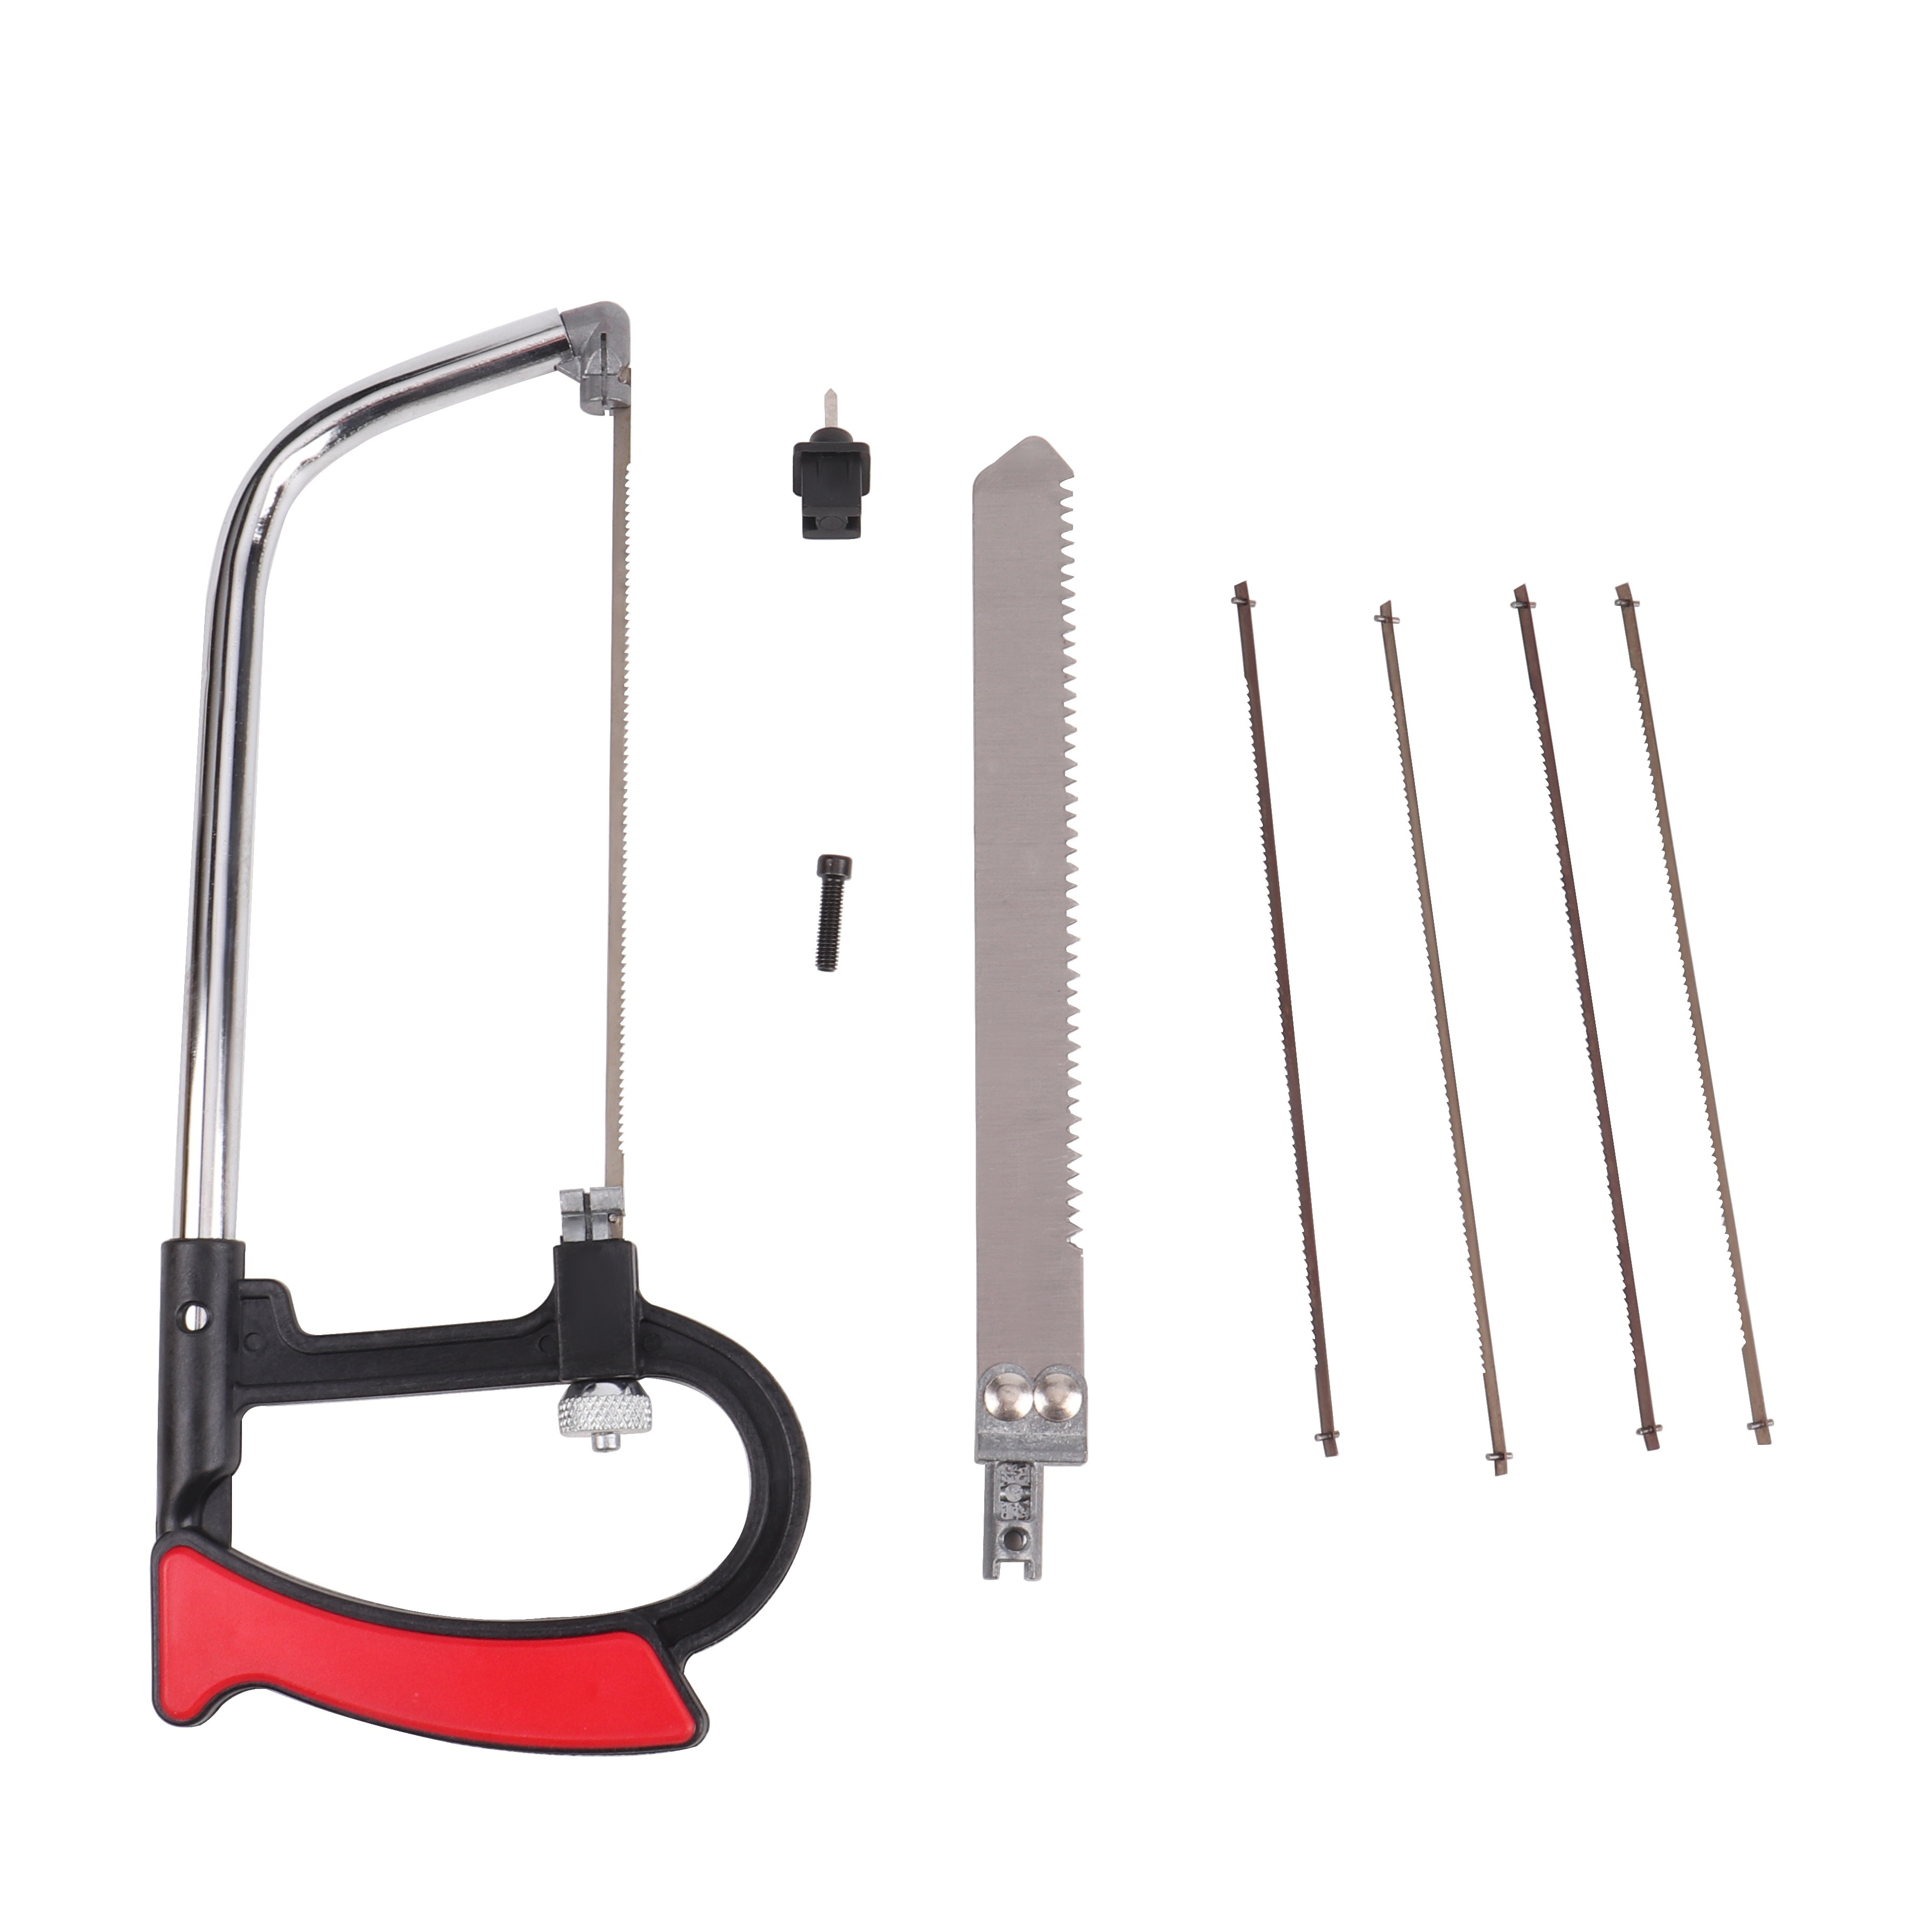 Jewelers Saw Frame Wire Saw 5/6 Inch Depth Coping Saw Fret Saw For  Woodworking Jewelry Making U-shaped Circulars Saw Wire Saw For Metal Cutting